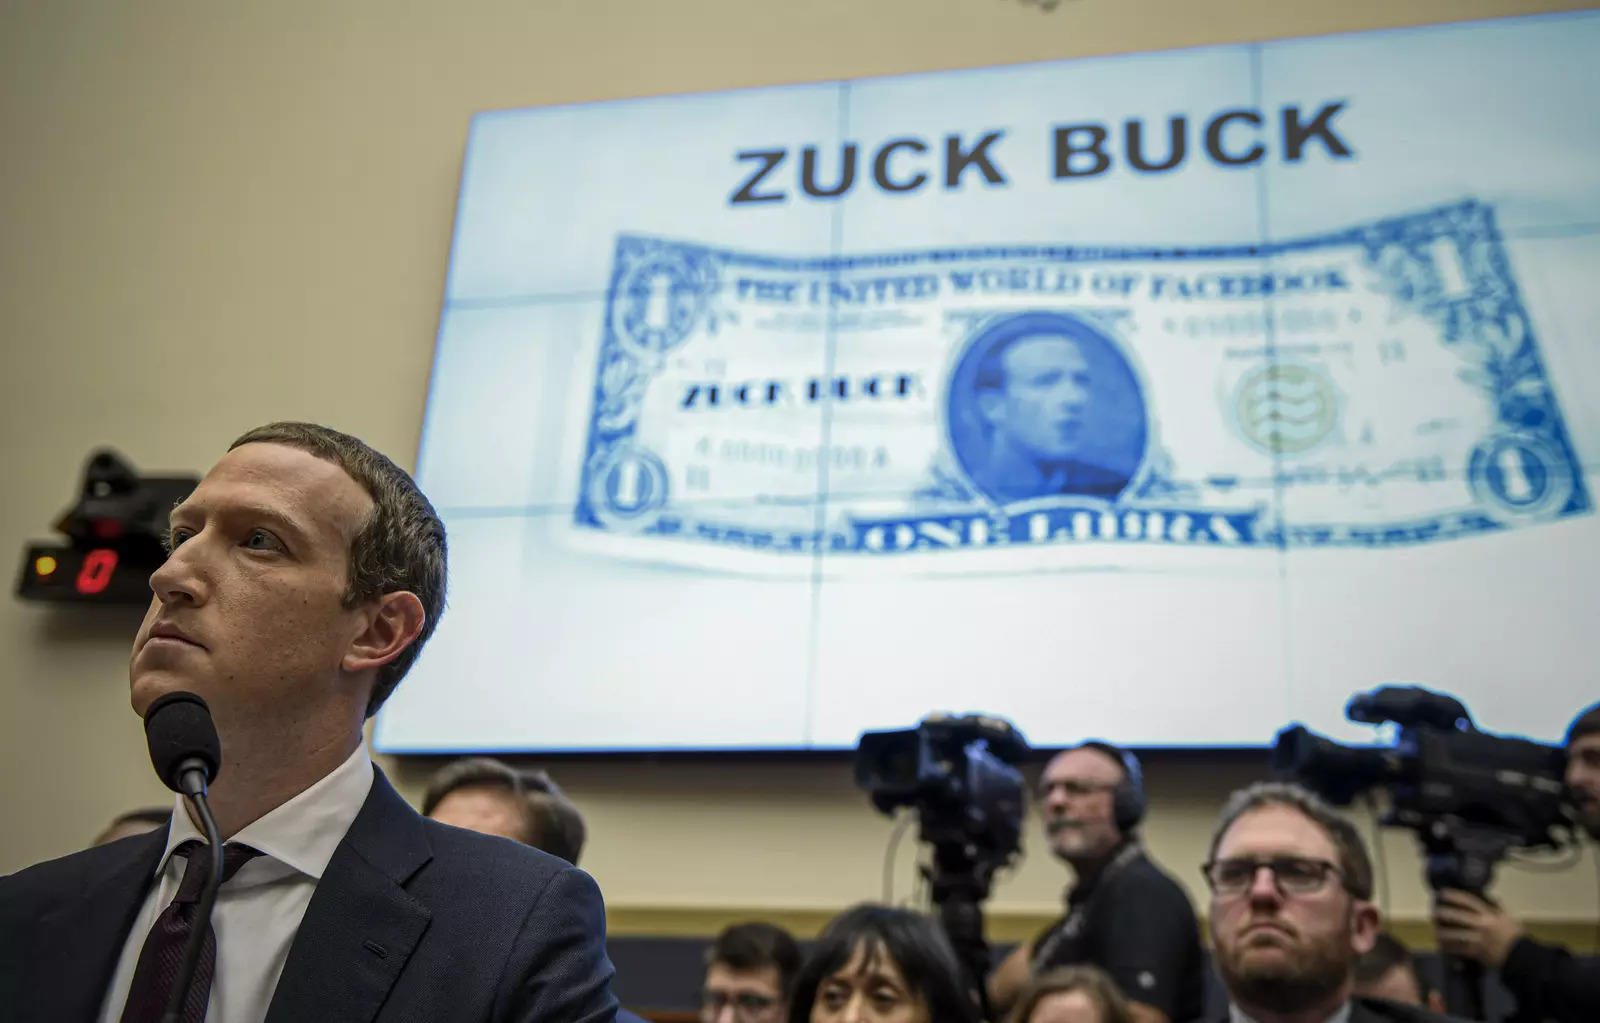 Facebook Chief Executive Officer Mark Zuckerberg, left, testifies before the House Financial Services Committee on Capitol Hill in Washington, about his plans for the new cryptocurrency Libra